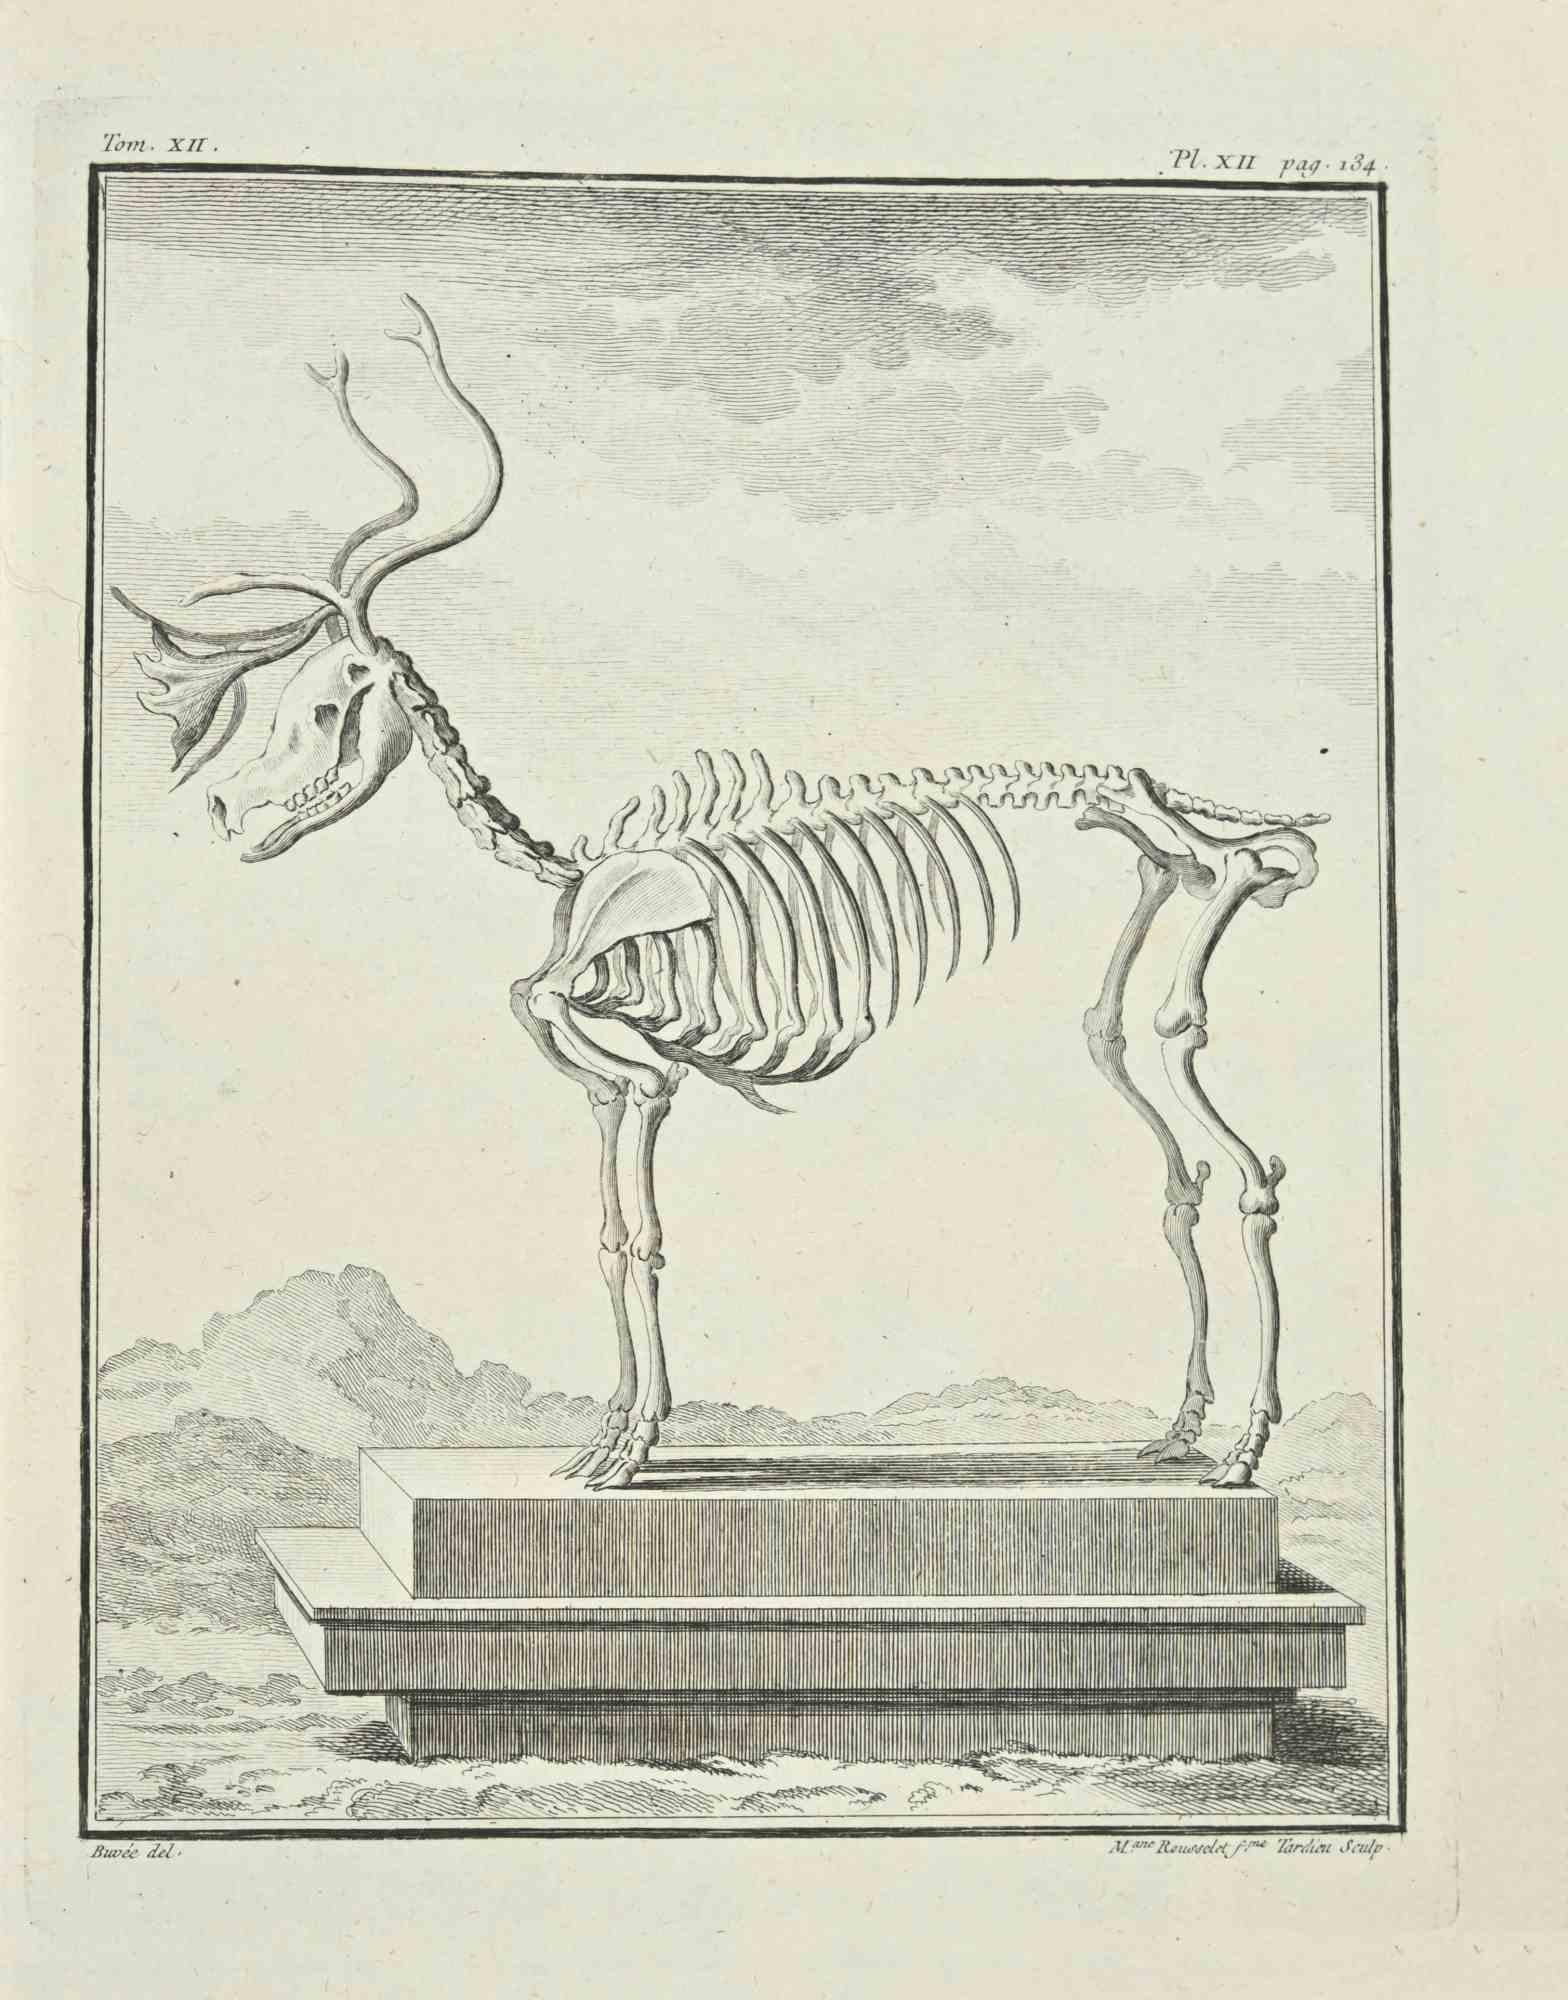 The Skeleton is an etching realized by Juste Madeline Rousselet in 1771.

It belongs to the suite "Histoire Naturelle de Buffon".

The Artist's signature is engraved lower right.

Good conditions.